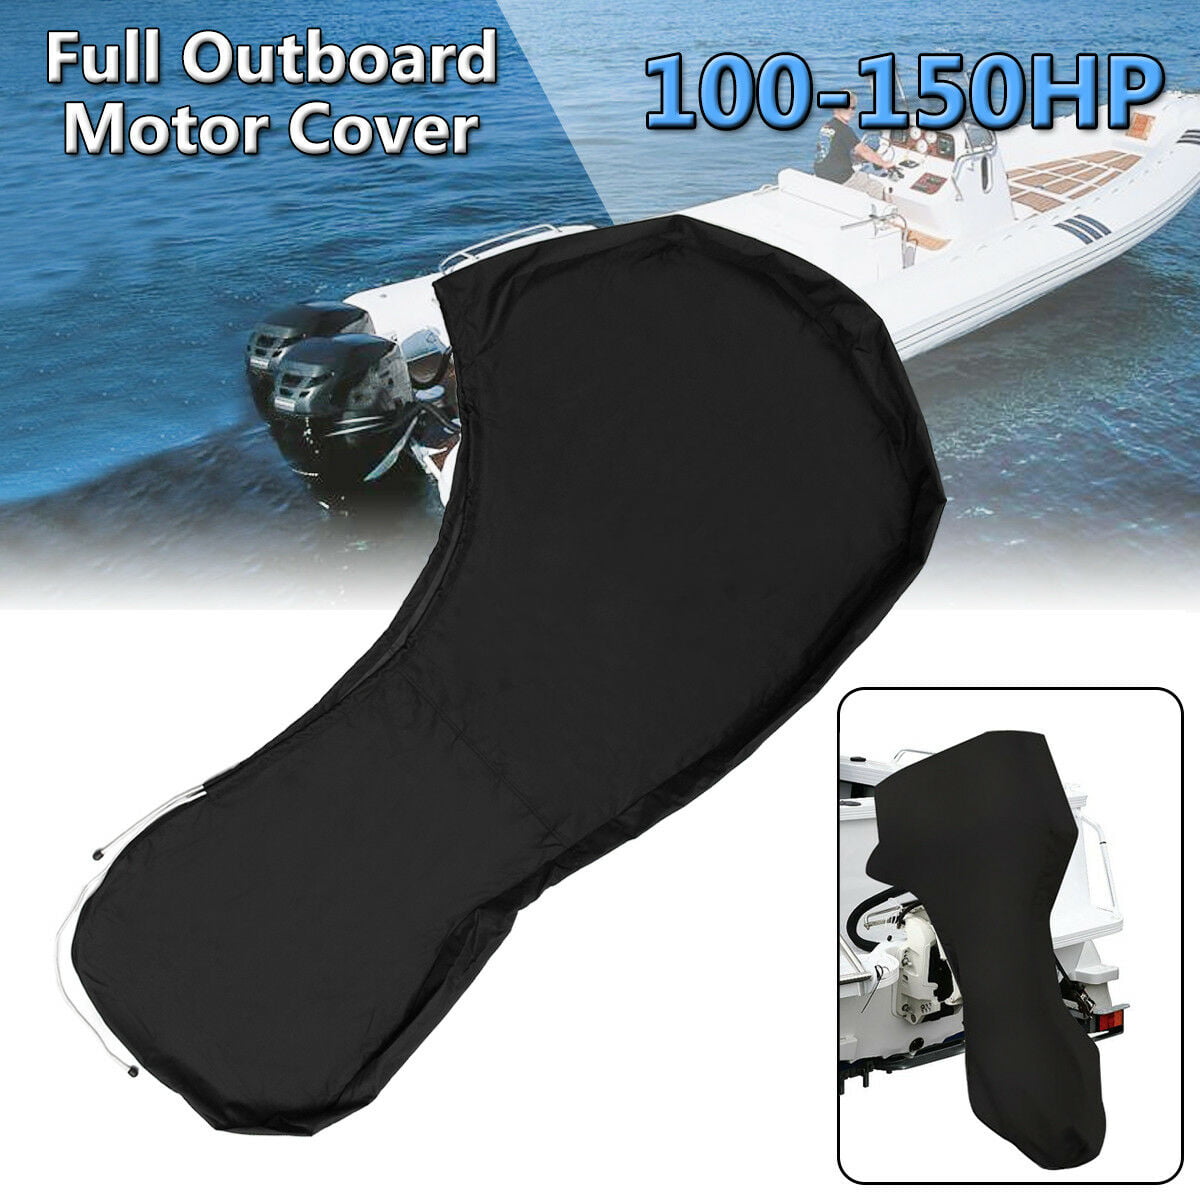 Speedboat Full Outboard Engine Motor Cover body Fit Up to 6-225HP 600D Black UK Boat Full Outboard Speedboat Engine Cover 